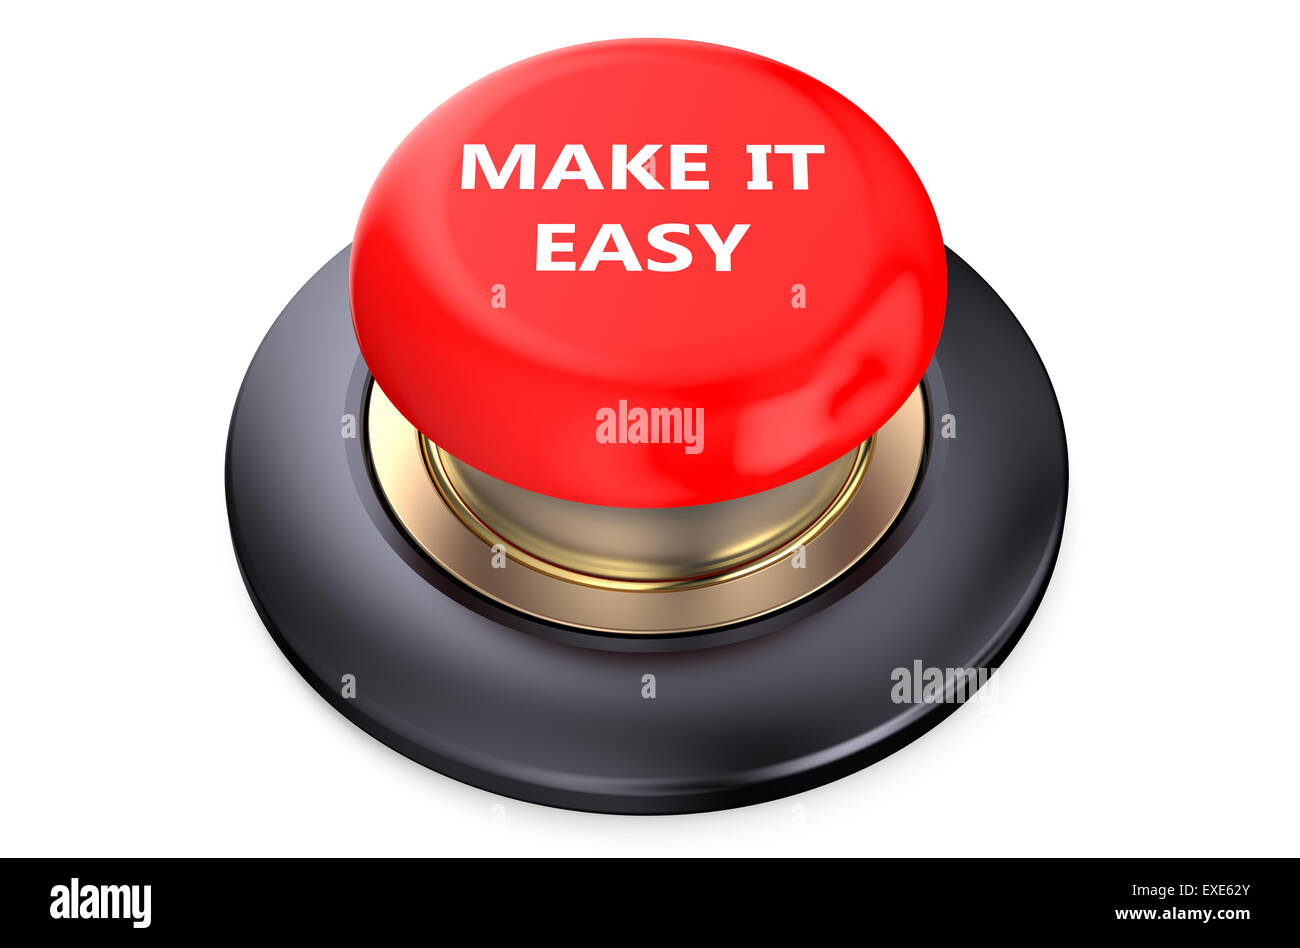 Make it easy red button isolated on white background Stock Photo